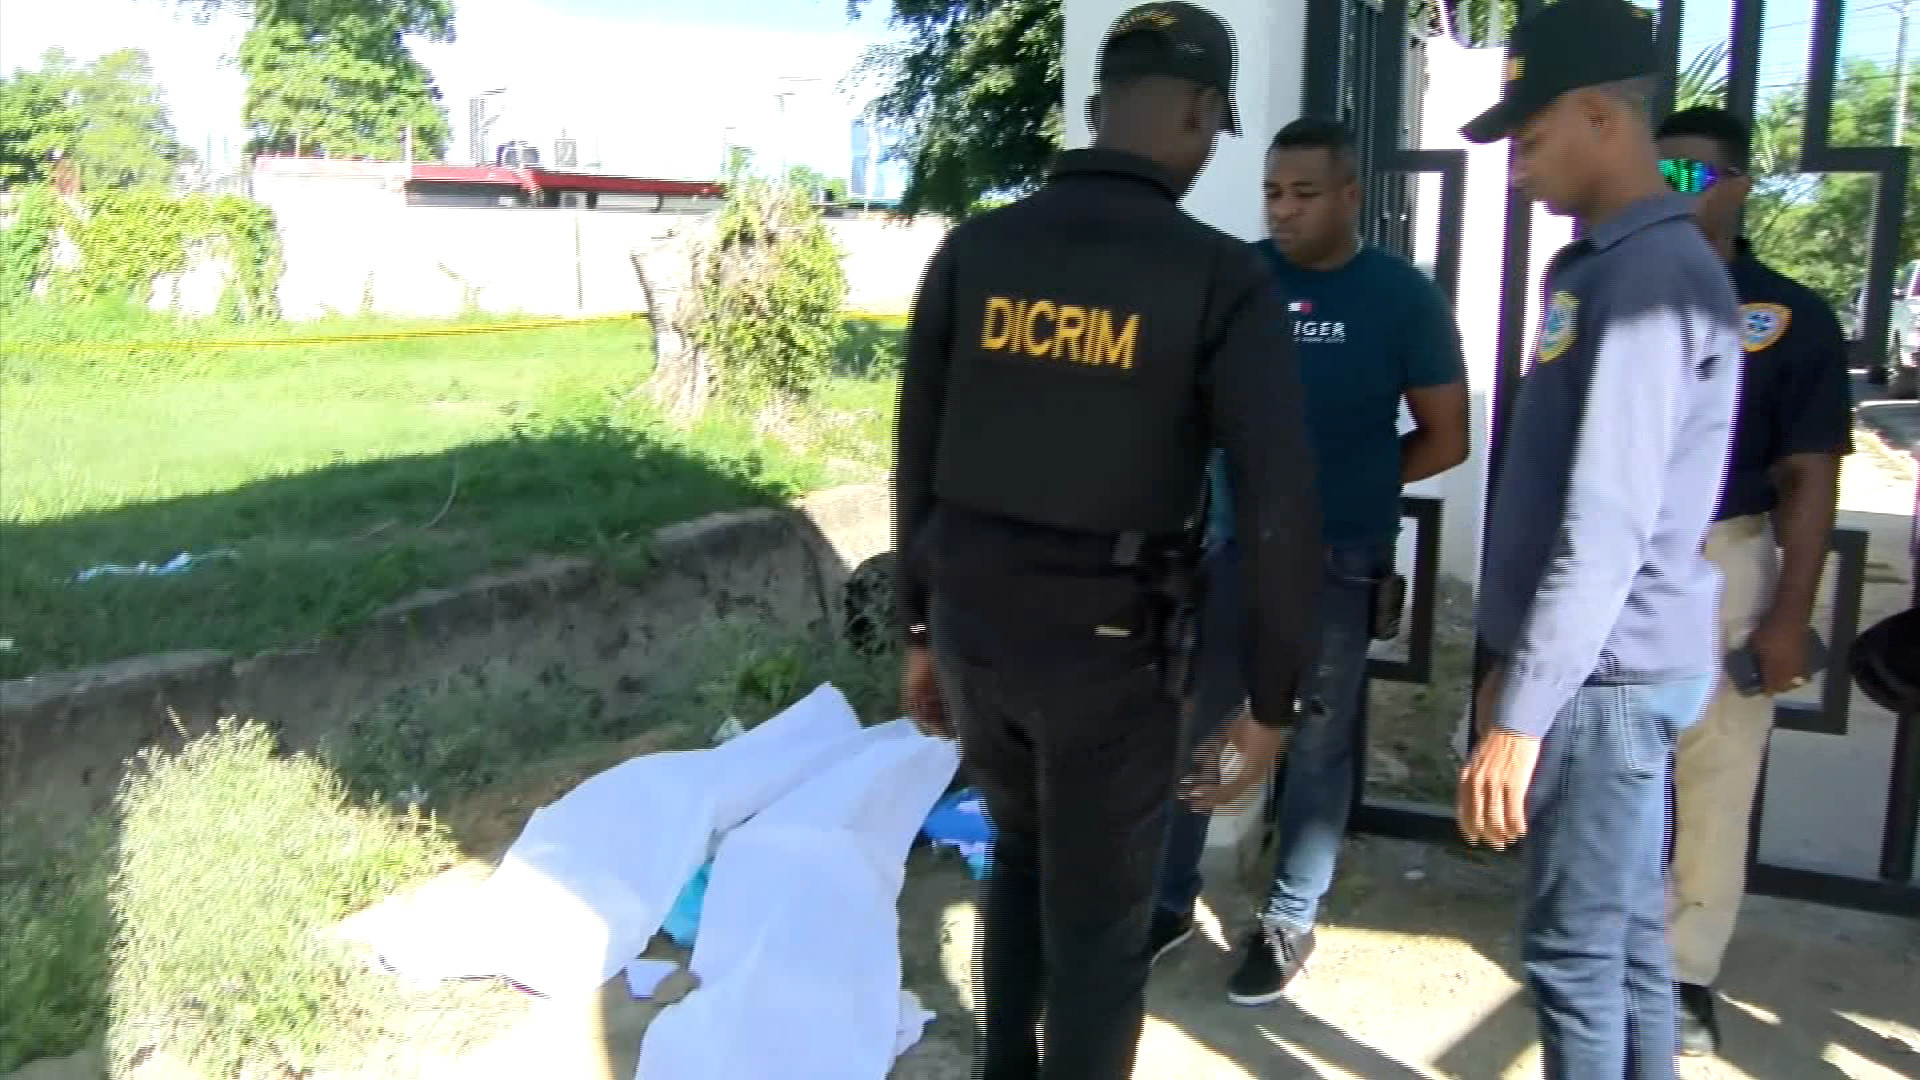 Bodies of Six Newborns Found at Dominican Republic Cemetery Entrance